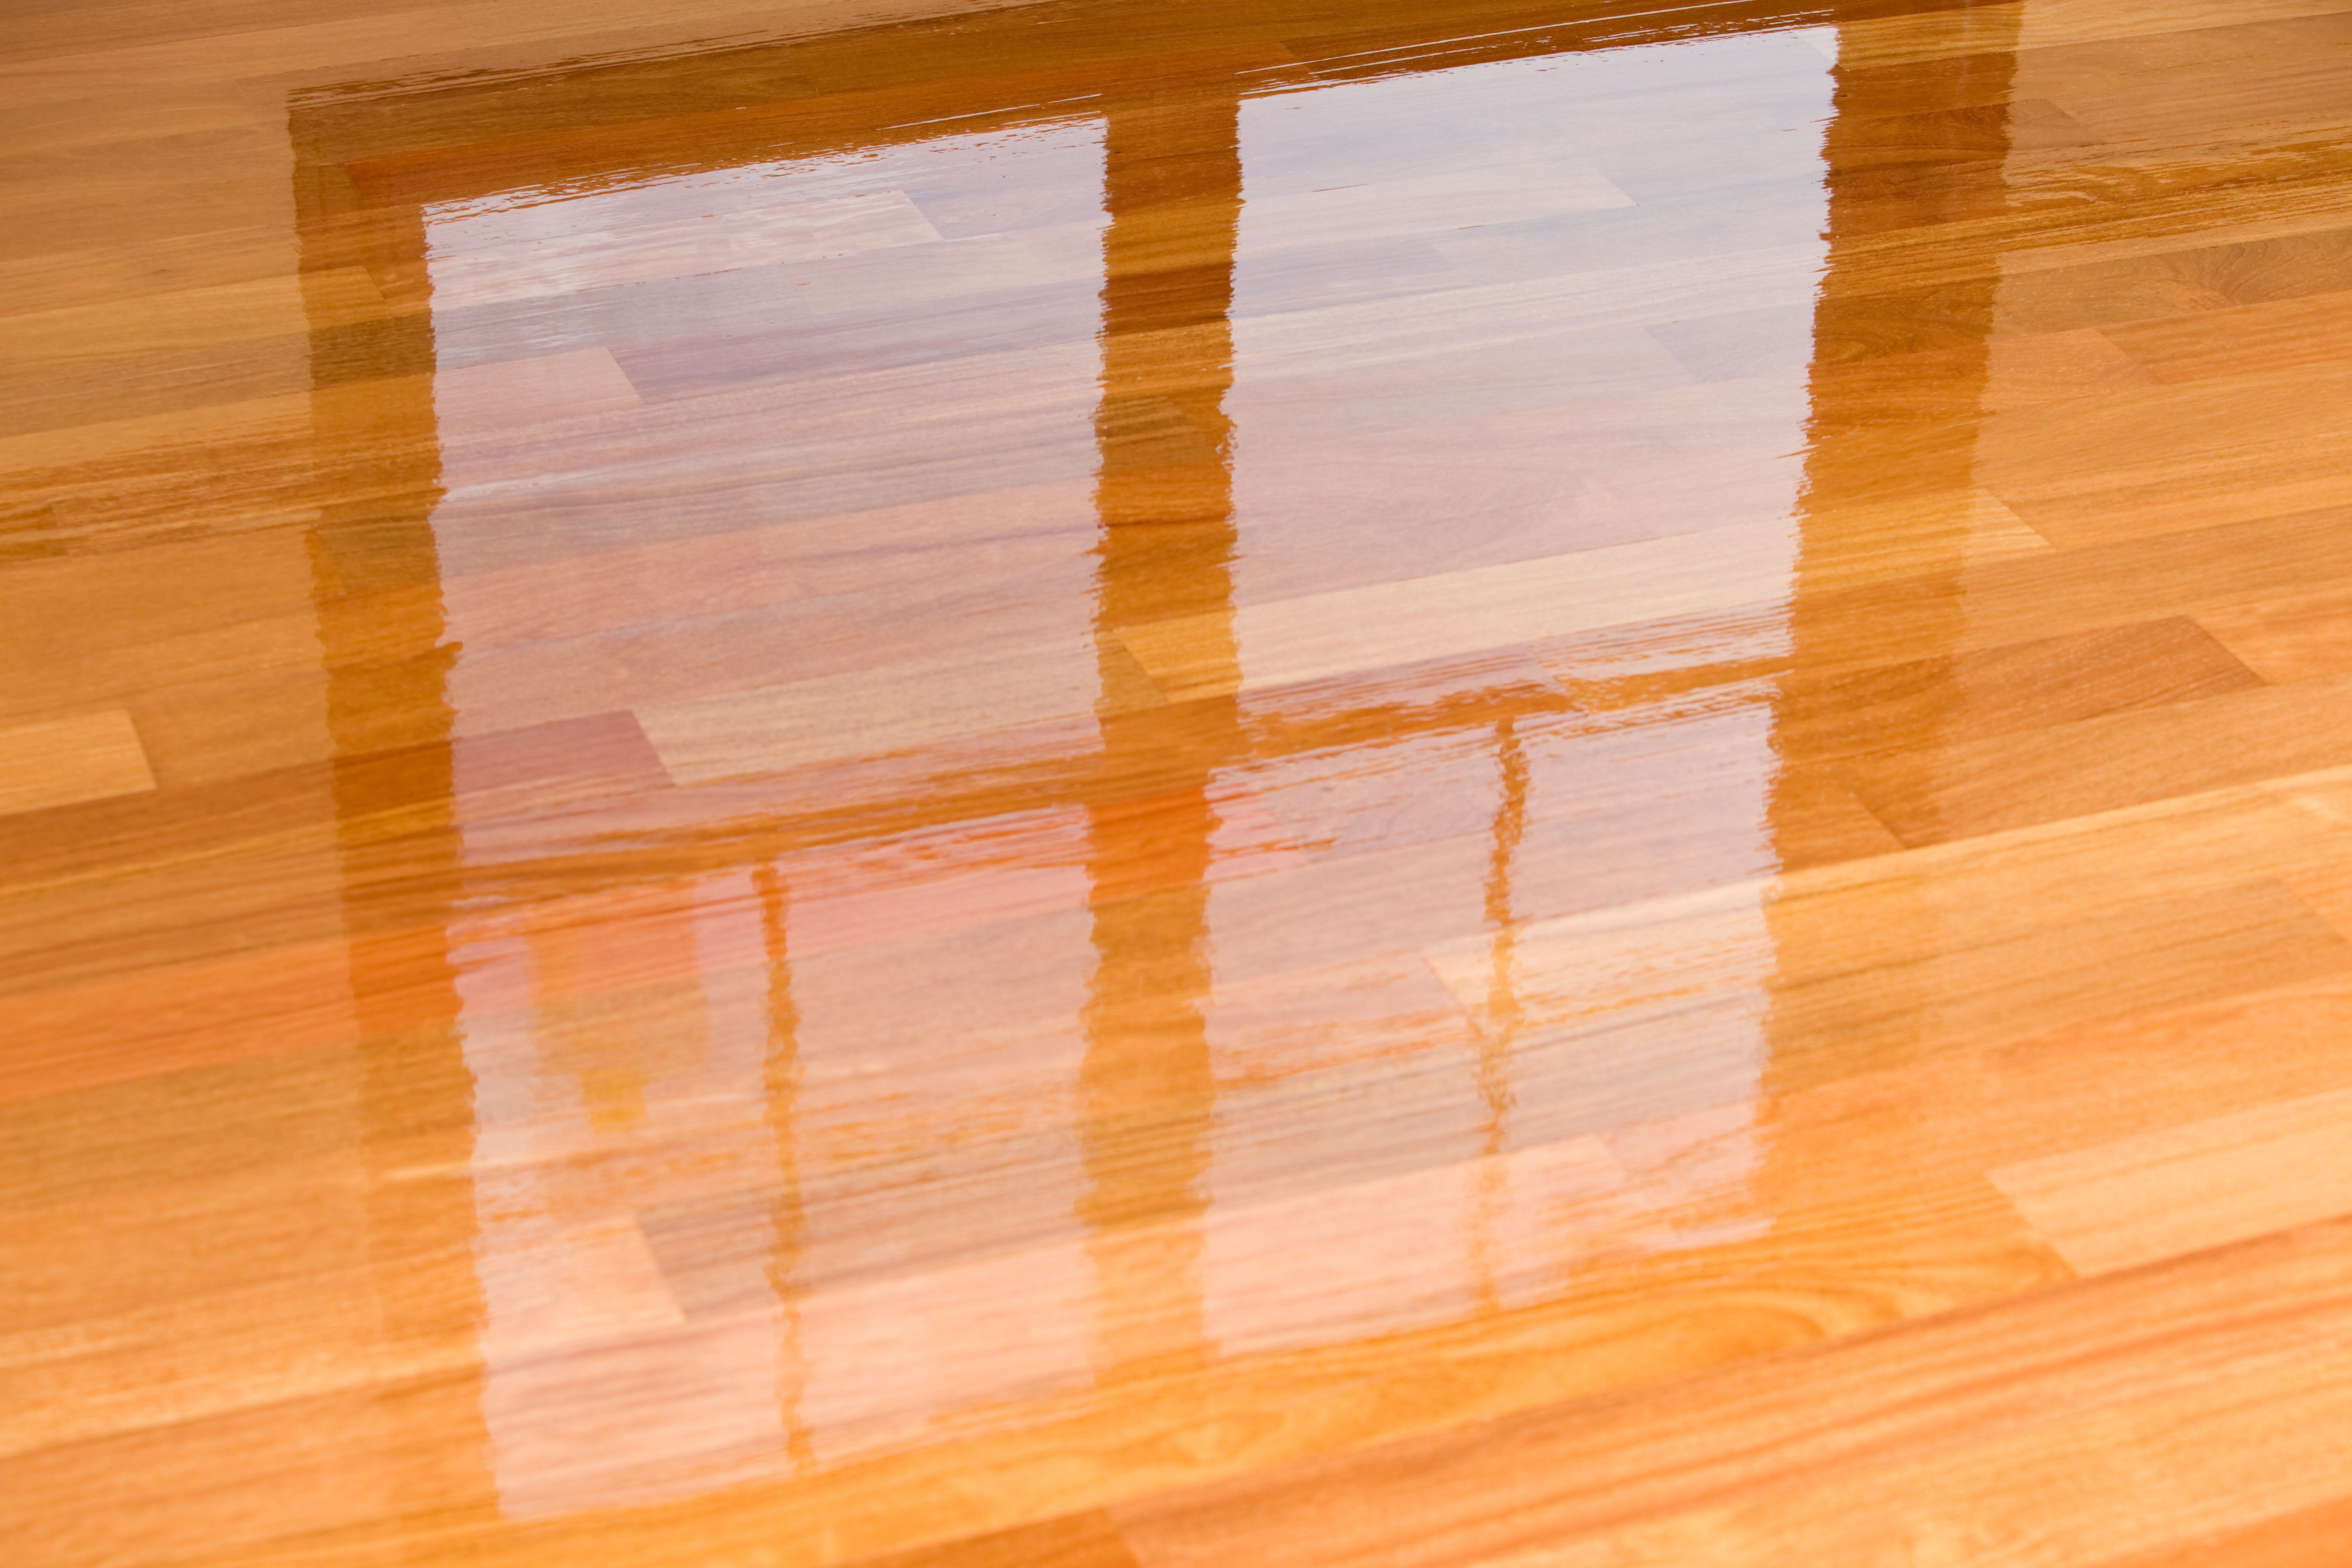 bruce lock fold hardwood flooring of guide to laminate flooring water and damage repair throughout wet polyurethane on new hardwood floor with window reflection 183846705 582e34da3df78c6f6a403968